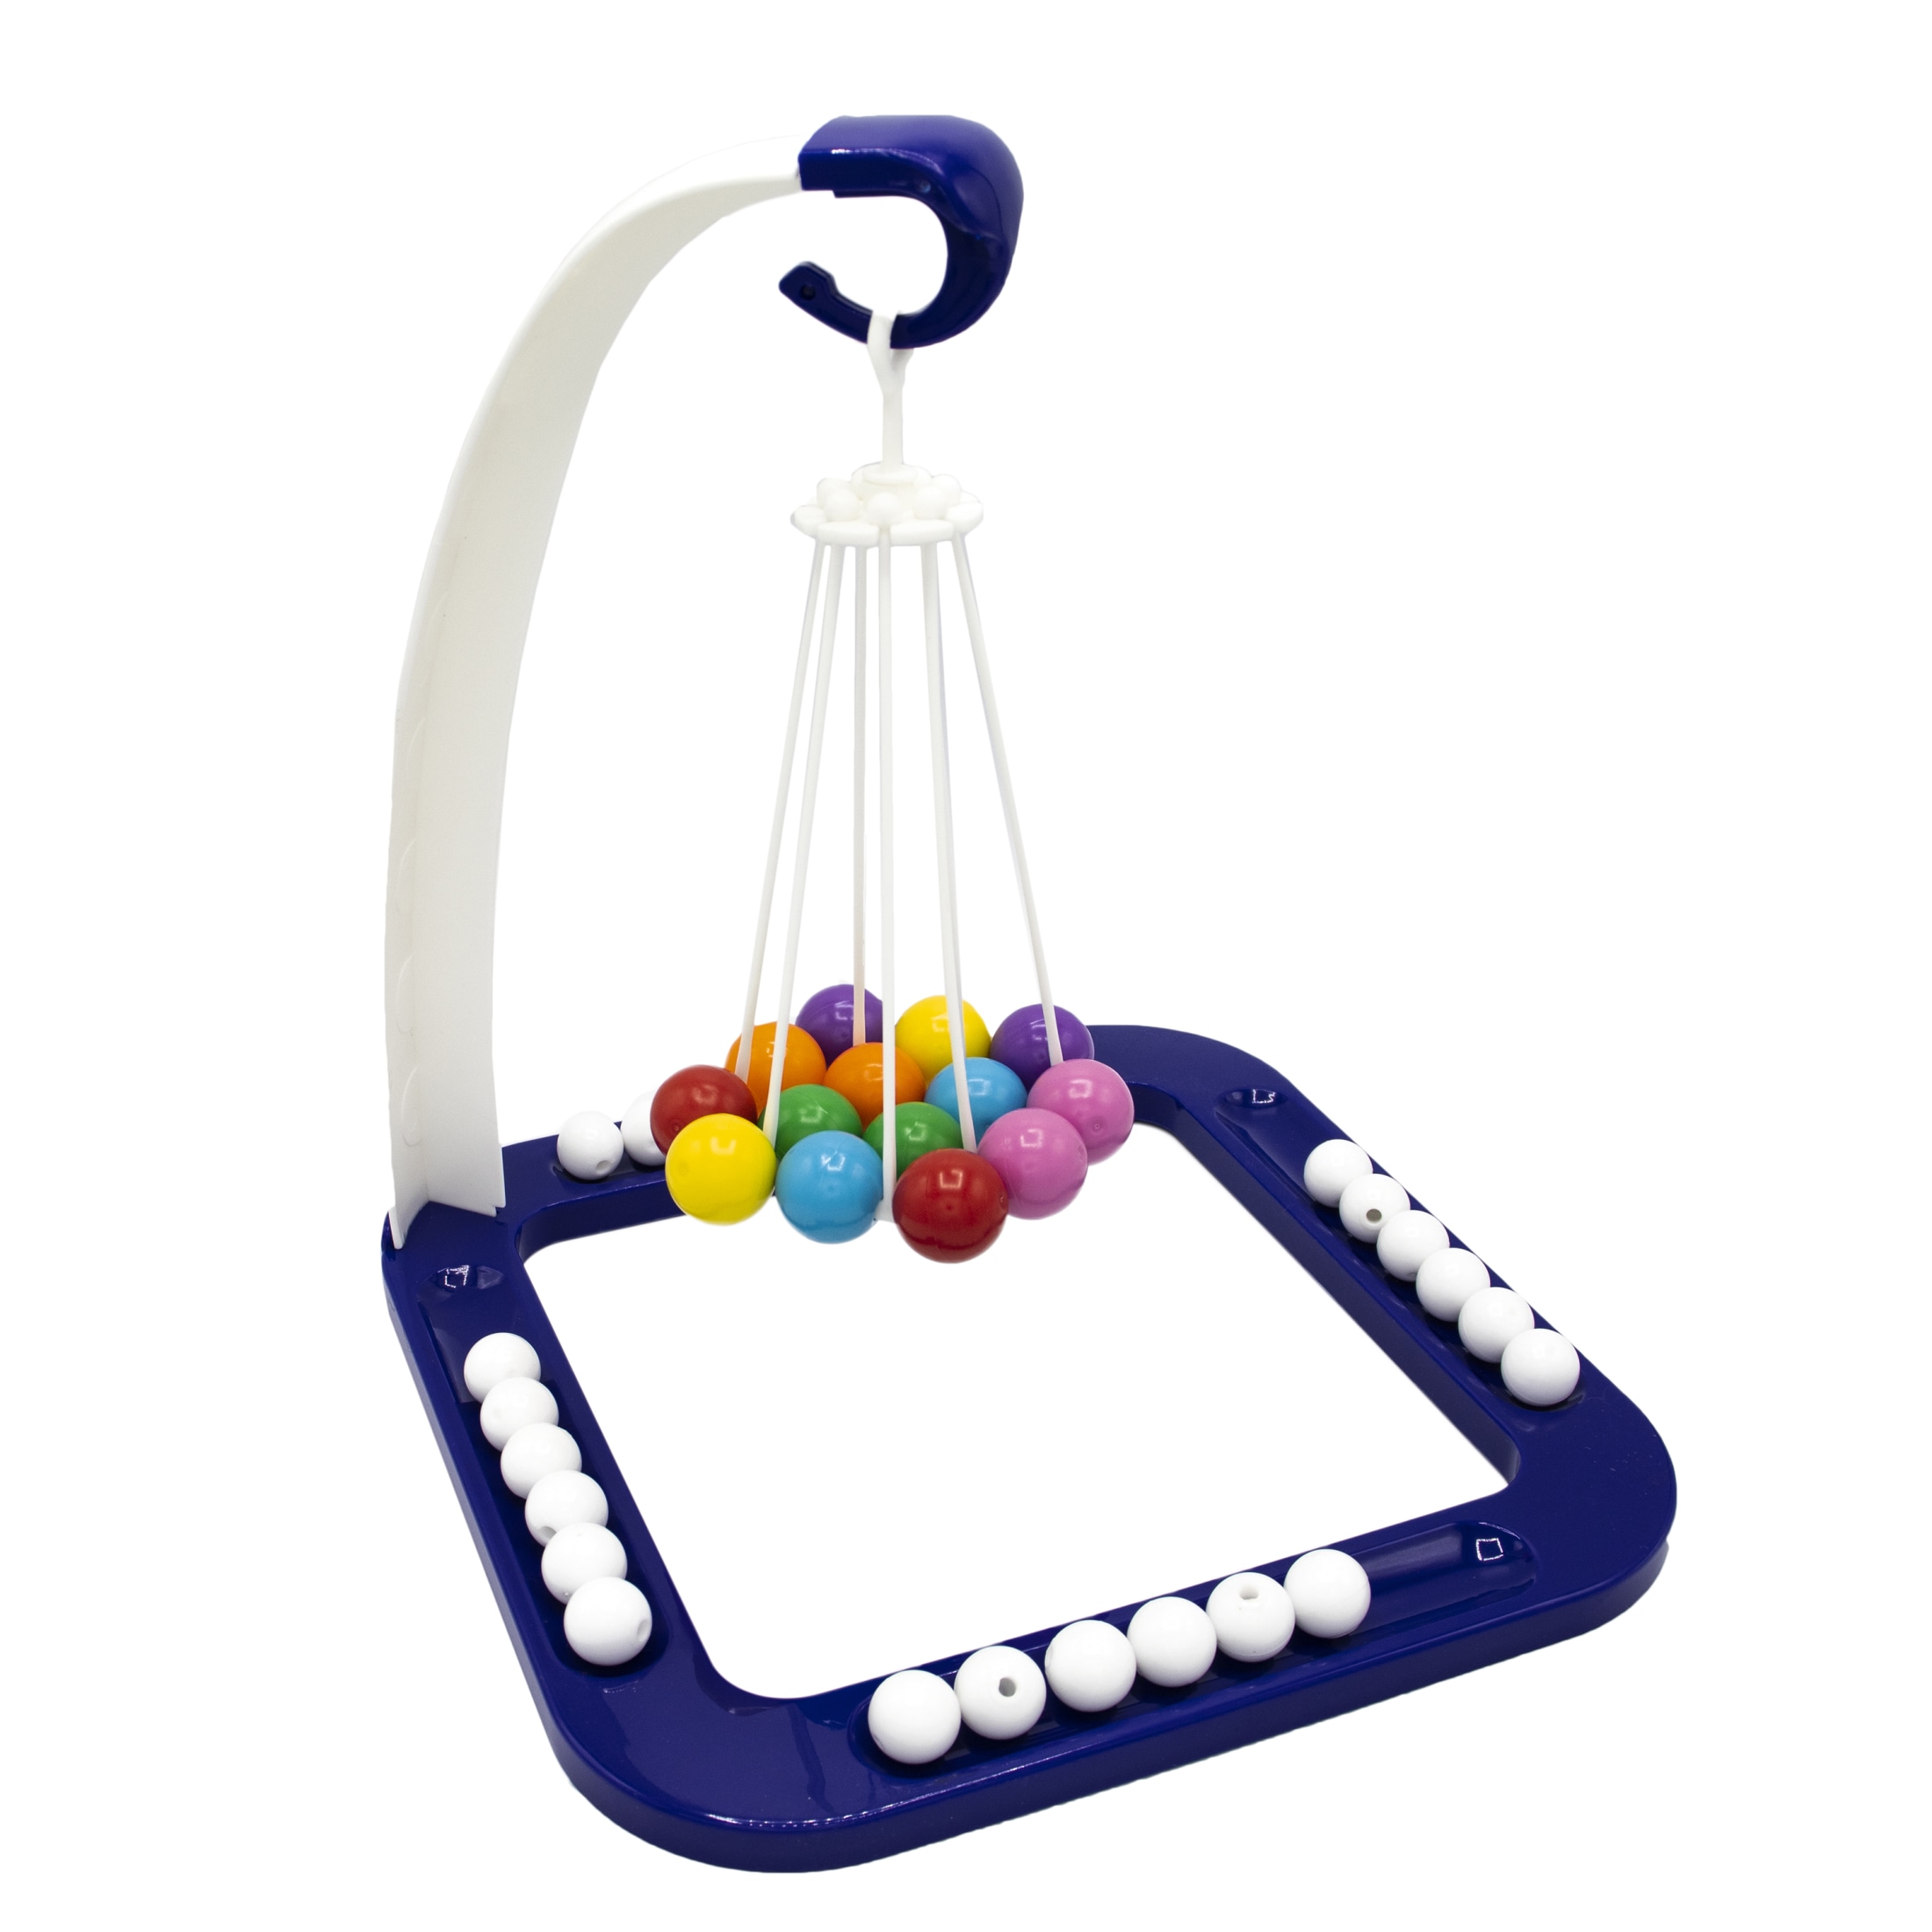 Megableu USA | Tumball Children's Bead Stacking Game for Ages 6 and Up and 2 to 4 Players - image 4 of 6